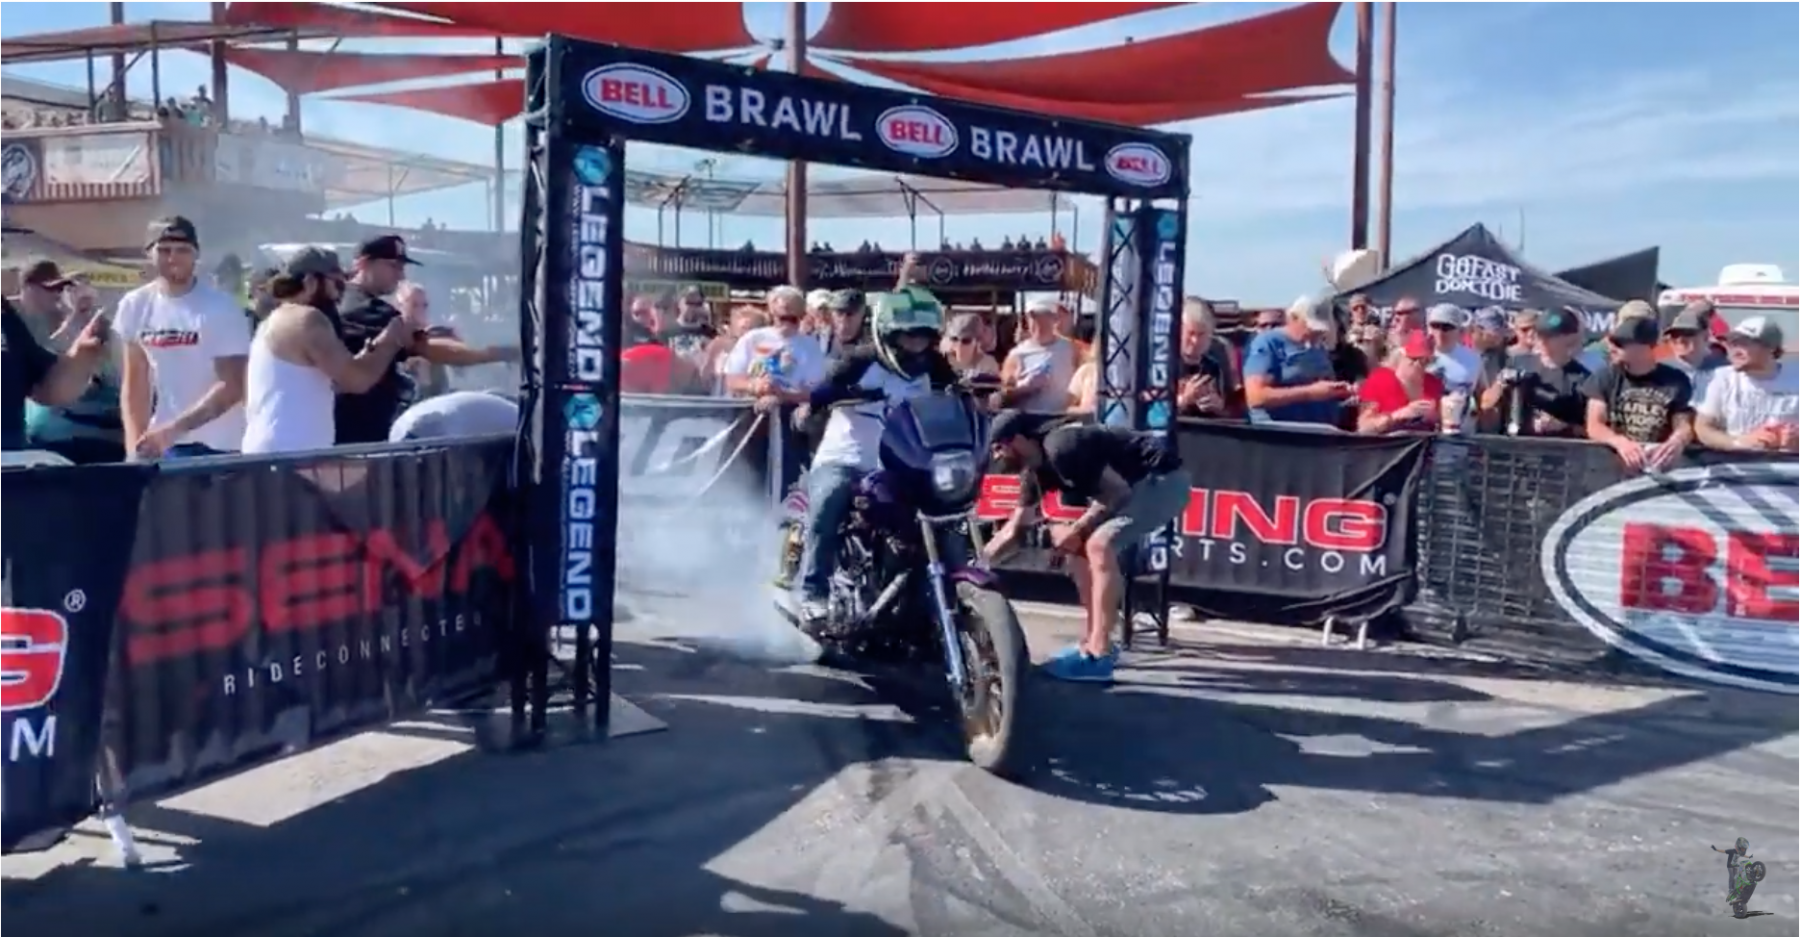 BELL BRAWL FINALS LIVE: Bell Powersports & Ride and Destroy’s “Brawl at the Buffalo” @Sturgis 2019